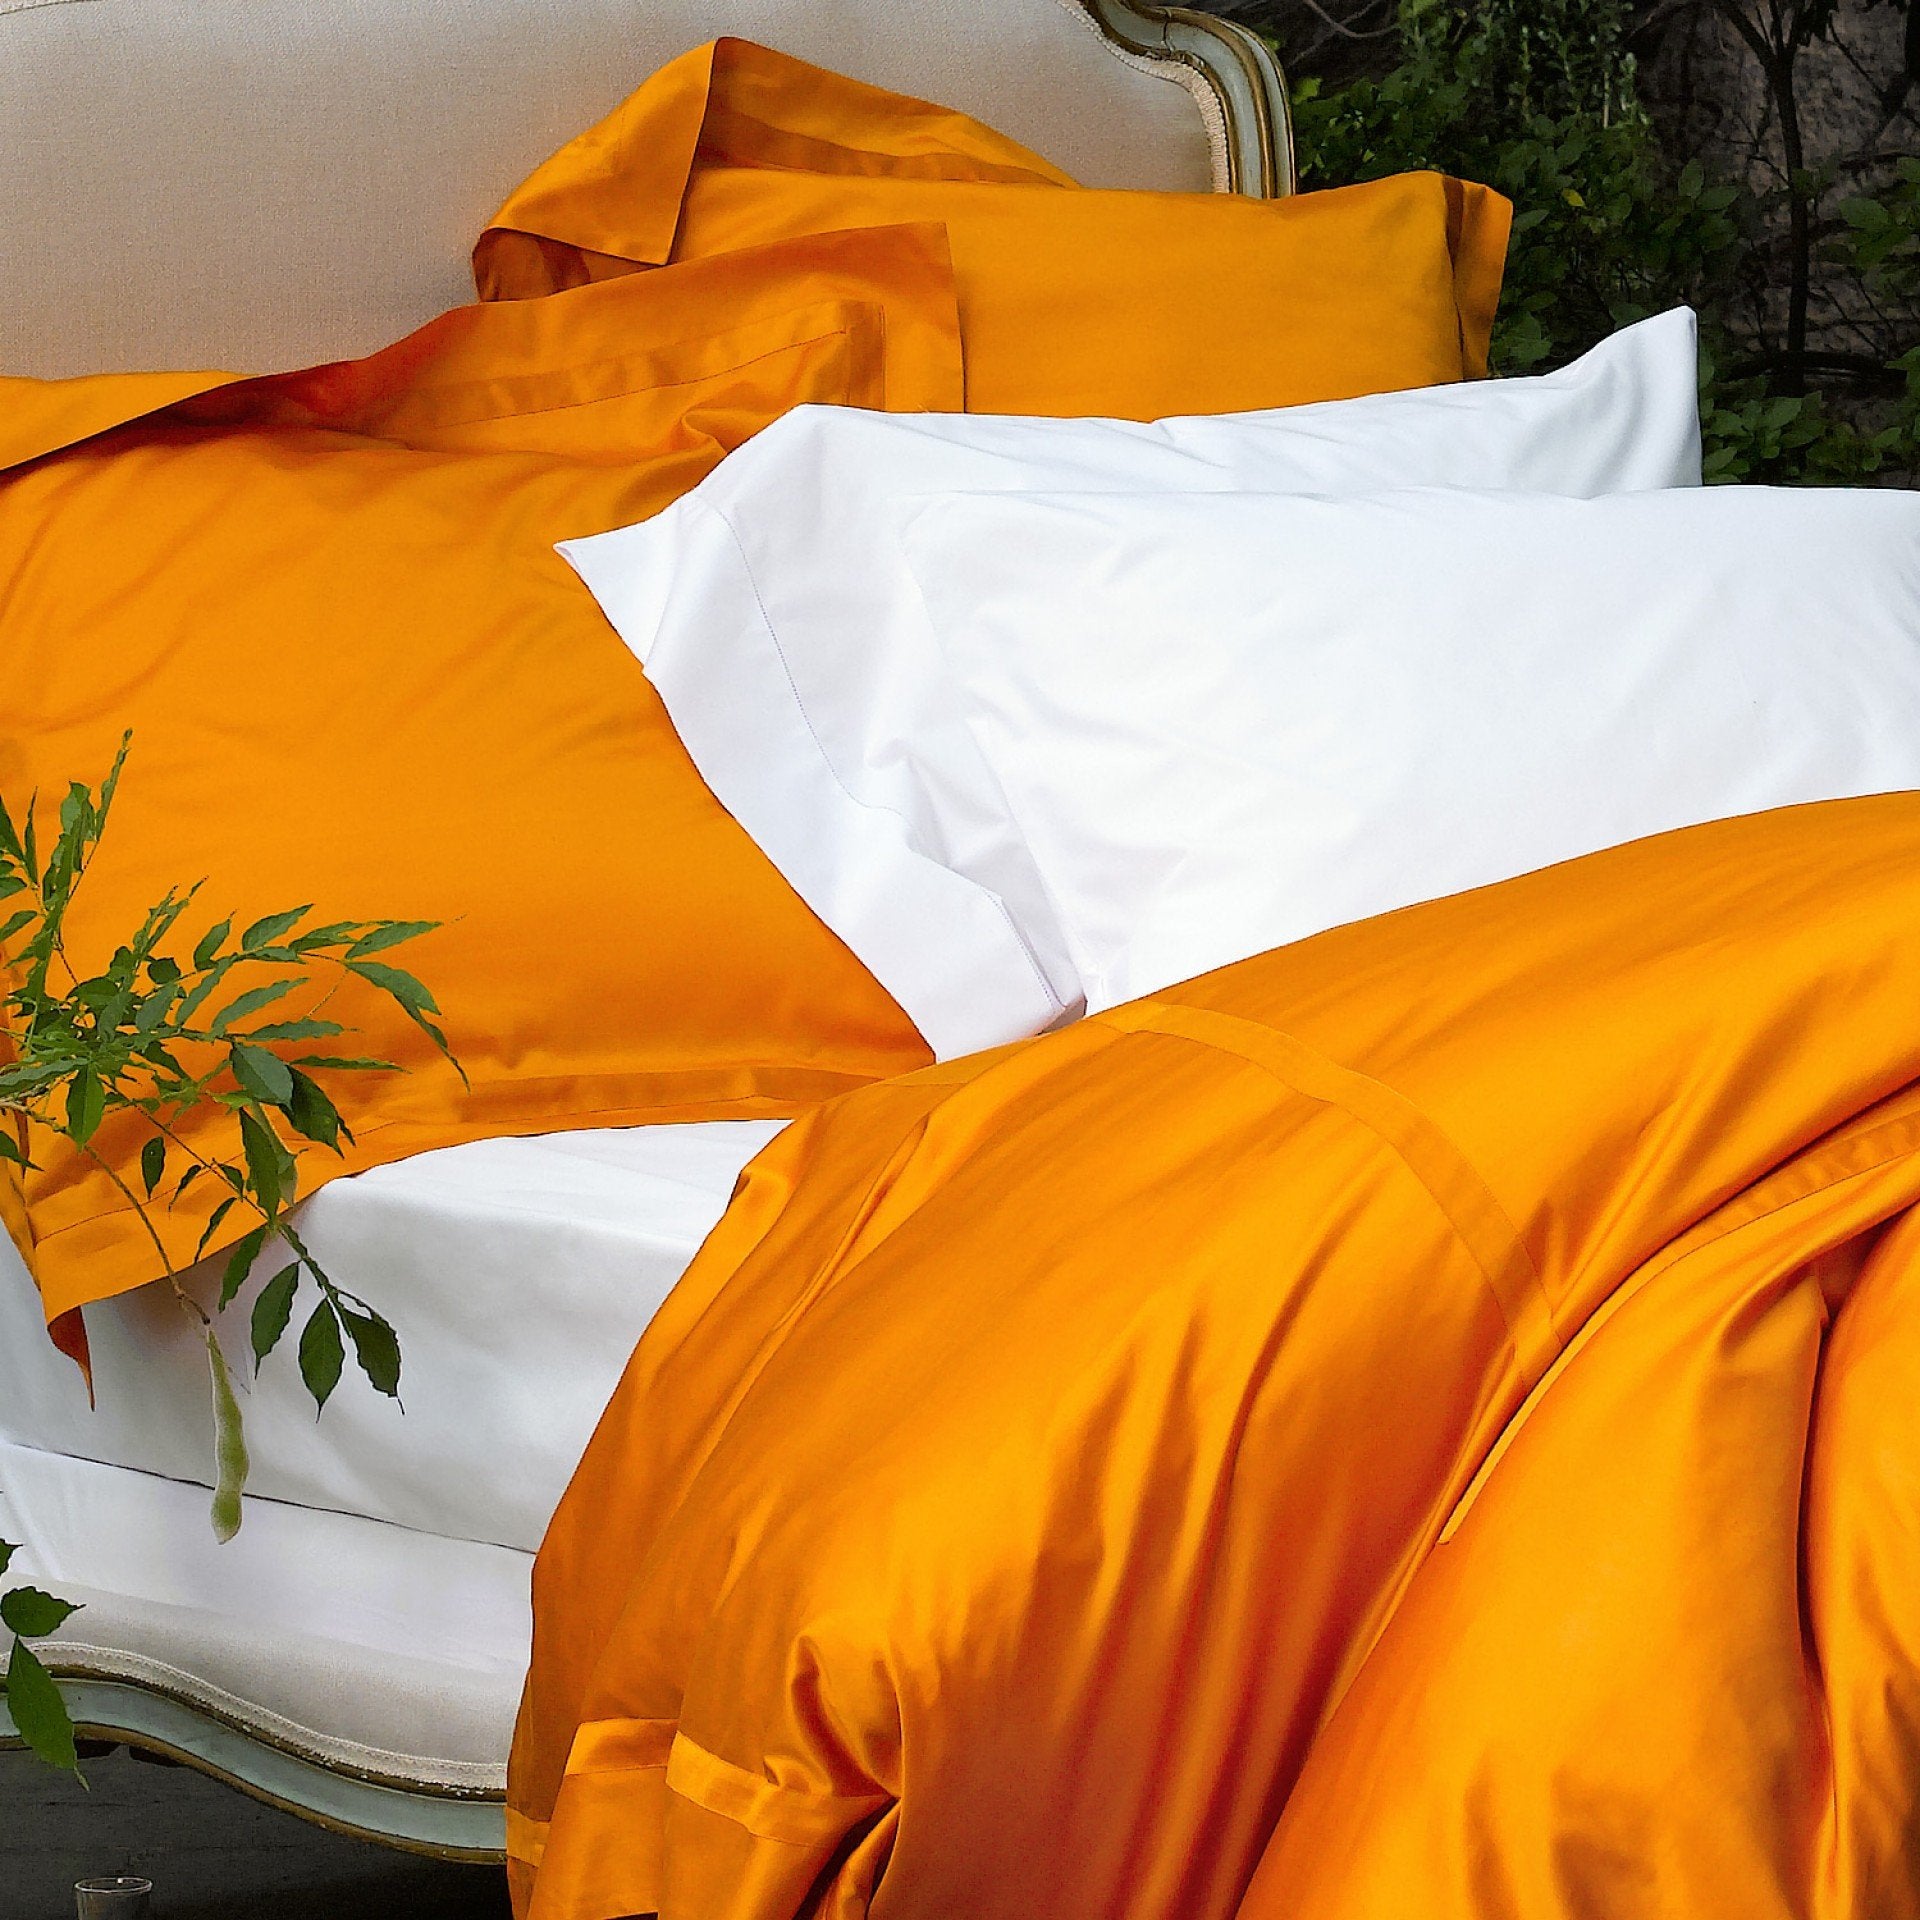 Nocturne Tangerine Duvet Covers by Matouk | Fig Linens and Home